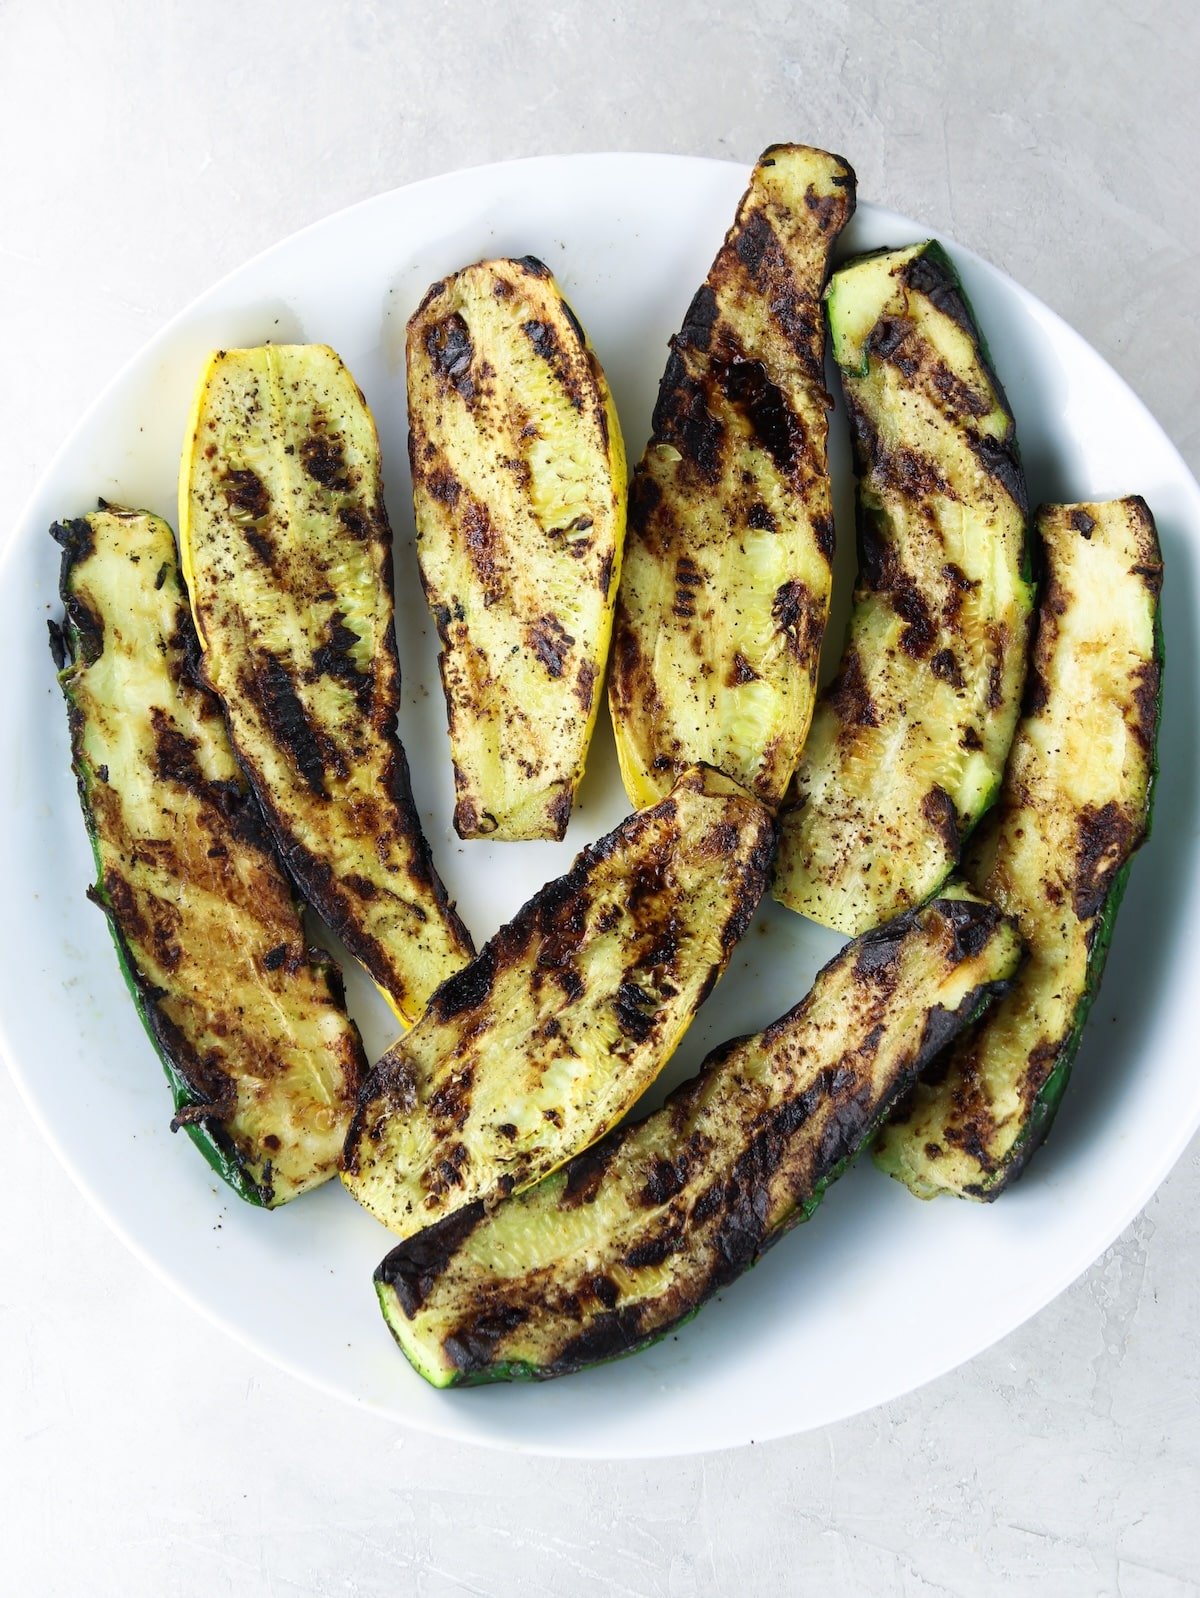 Zucchini and squash grilled on a plate.